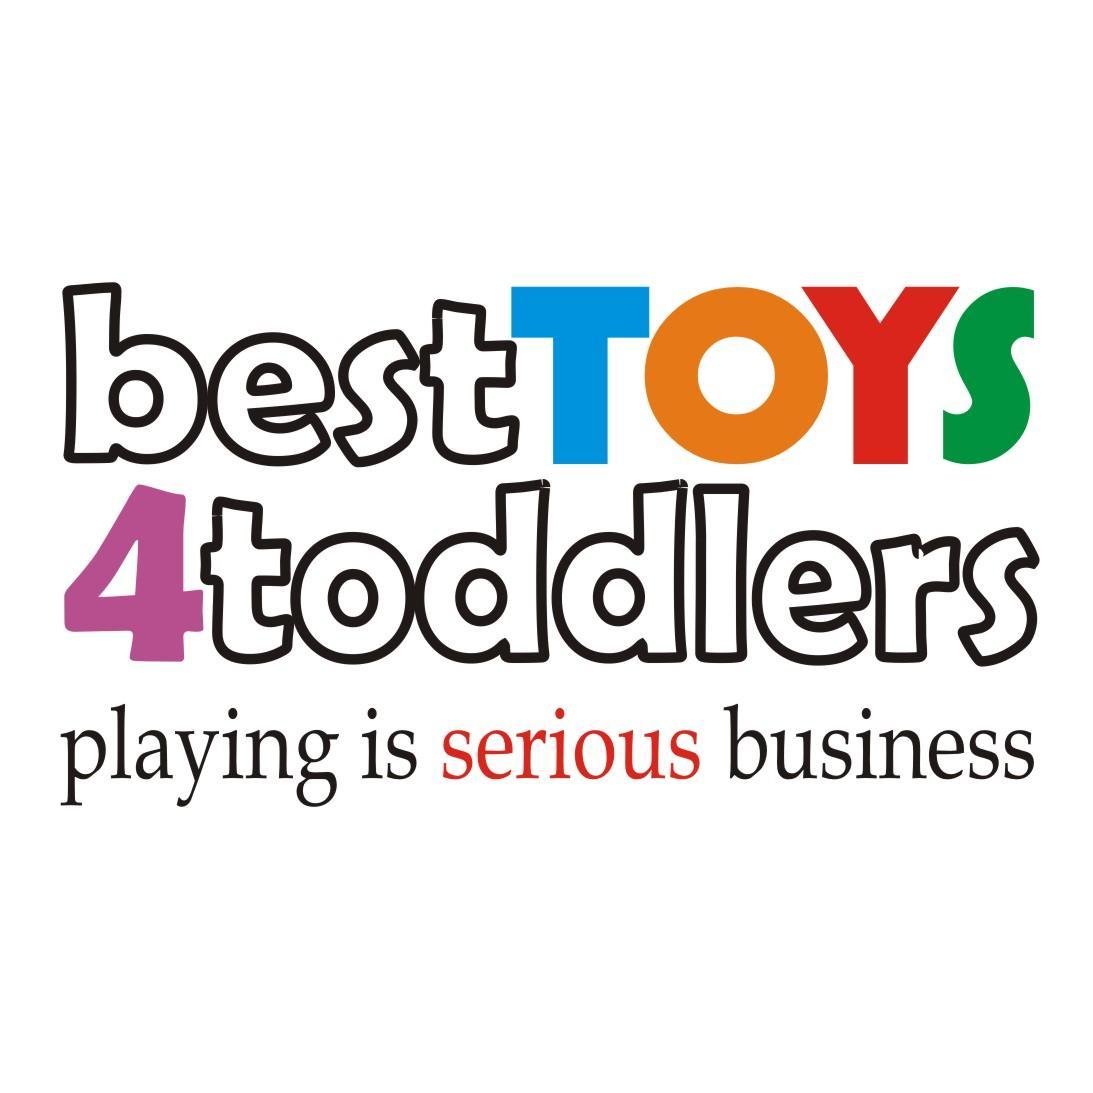 No more Toddler boredom. We are sneaking education into our Toddler’s playtime. As parents we know: Playing is serious business!  #junkplay #TotHacks